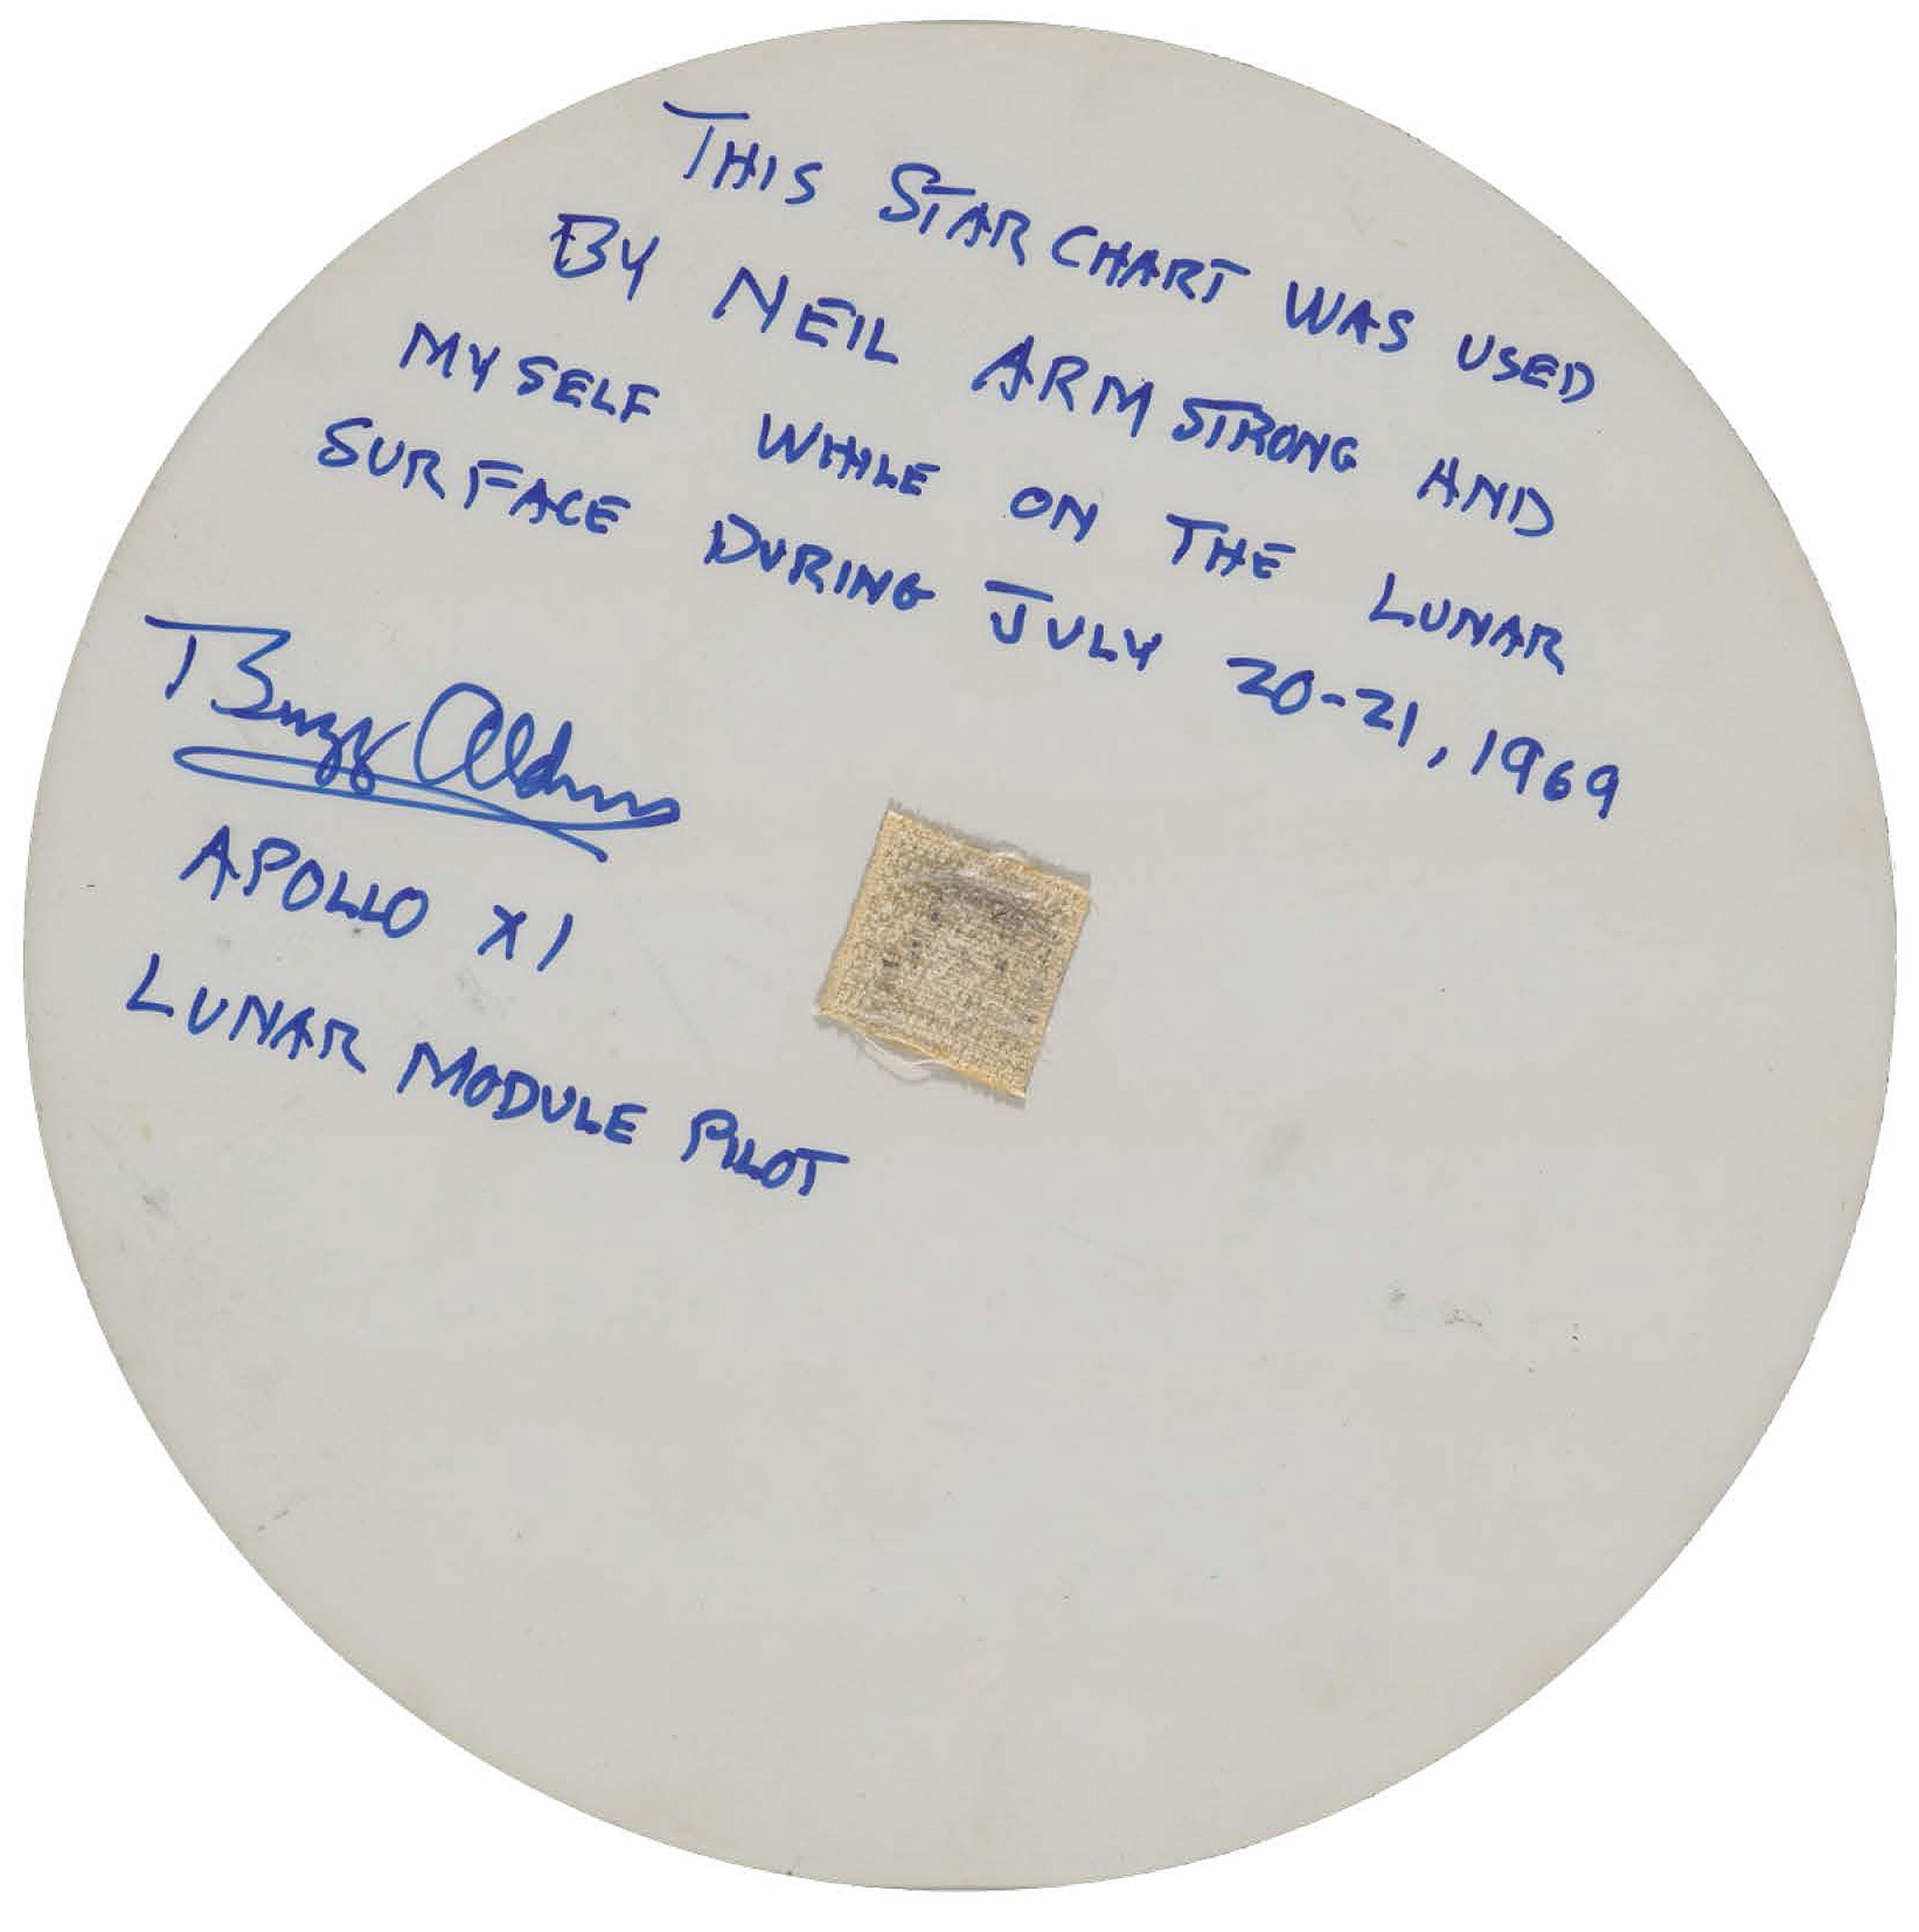 Back of the star chart used by Apollo 11 astronauts.